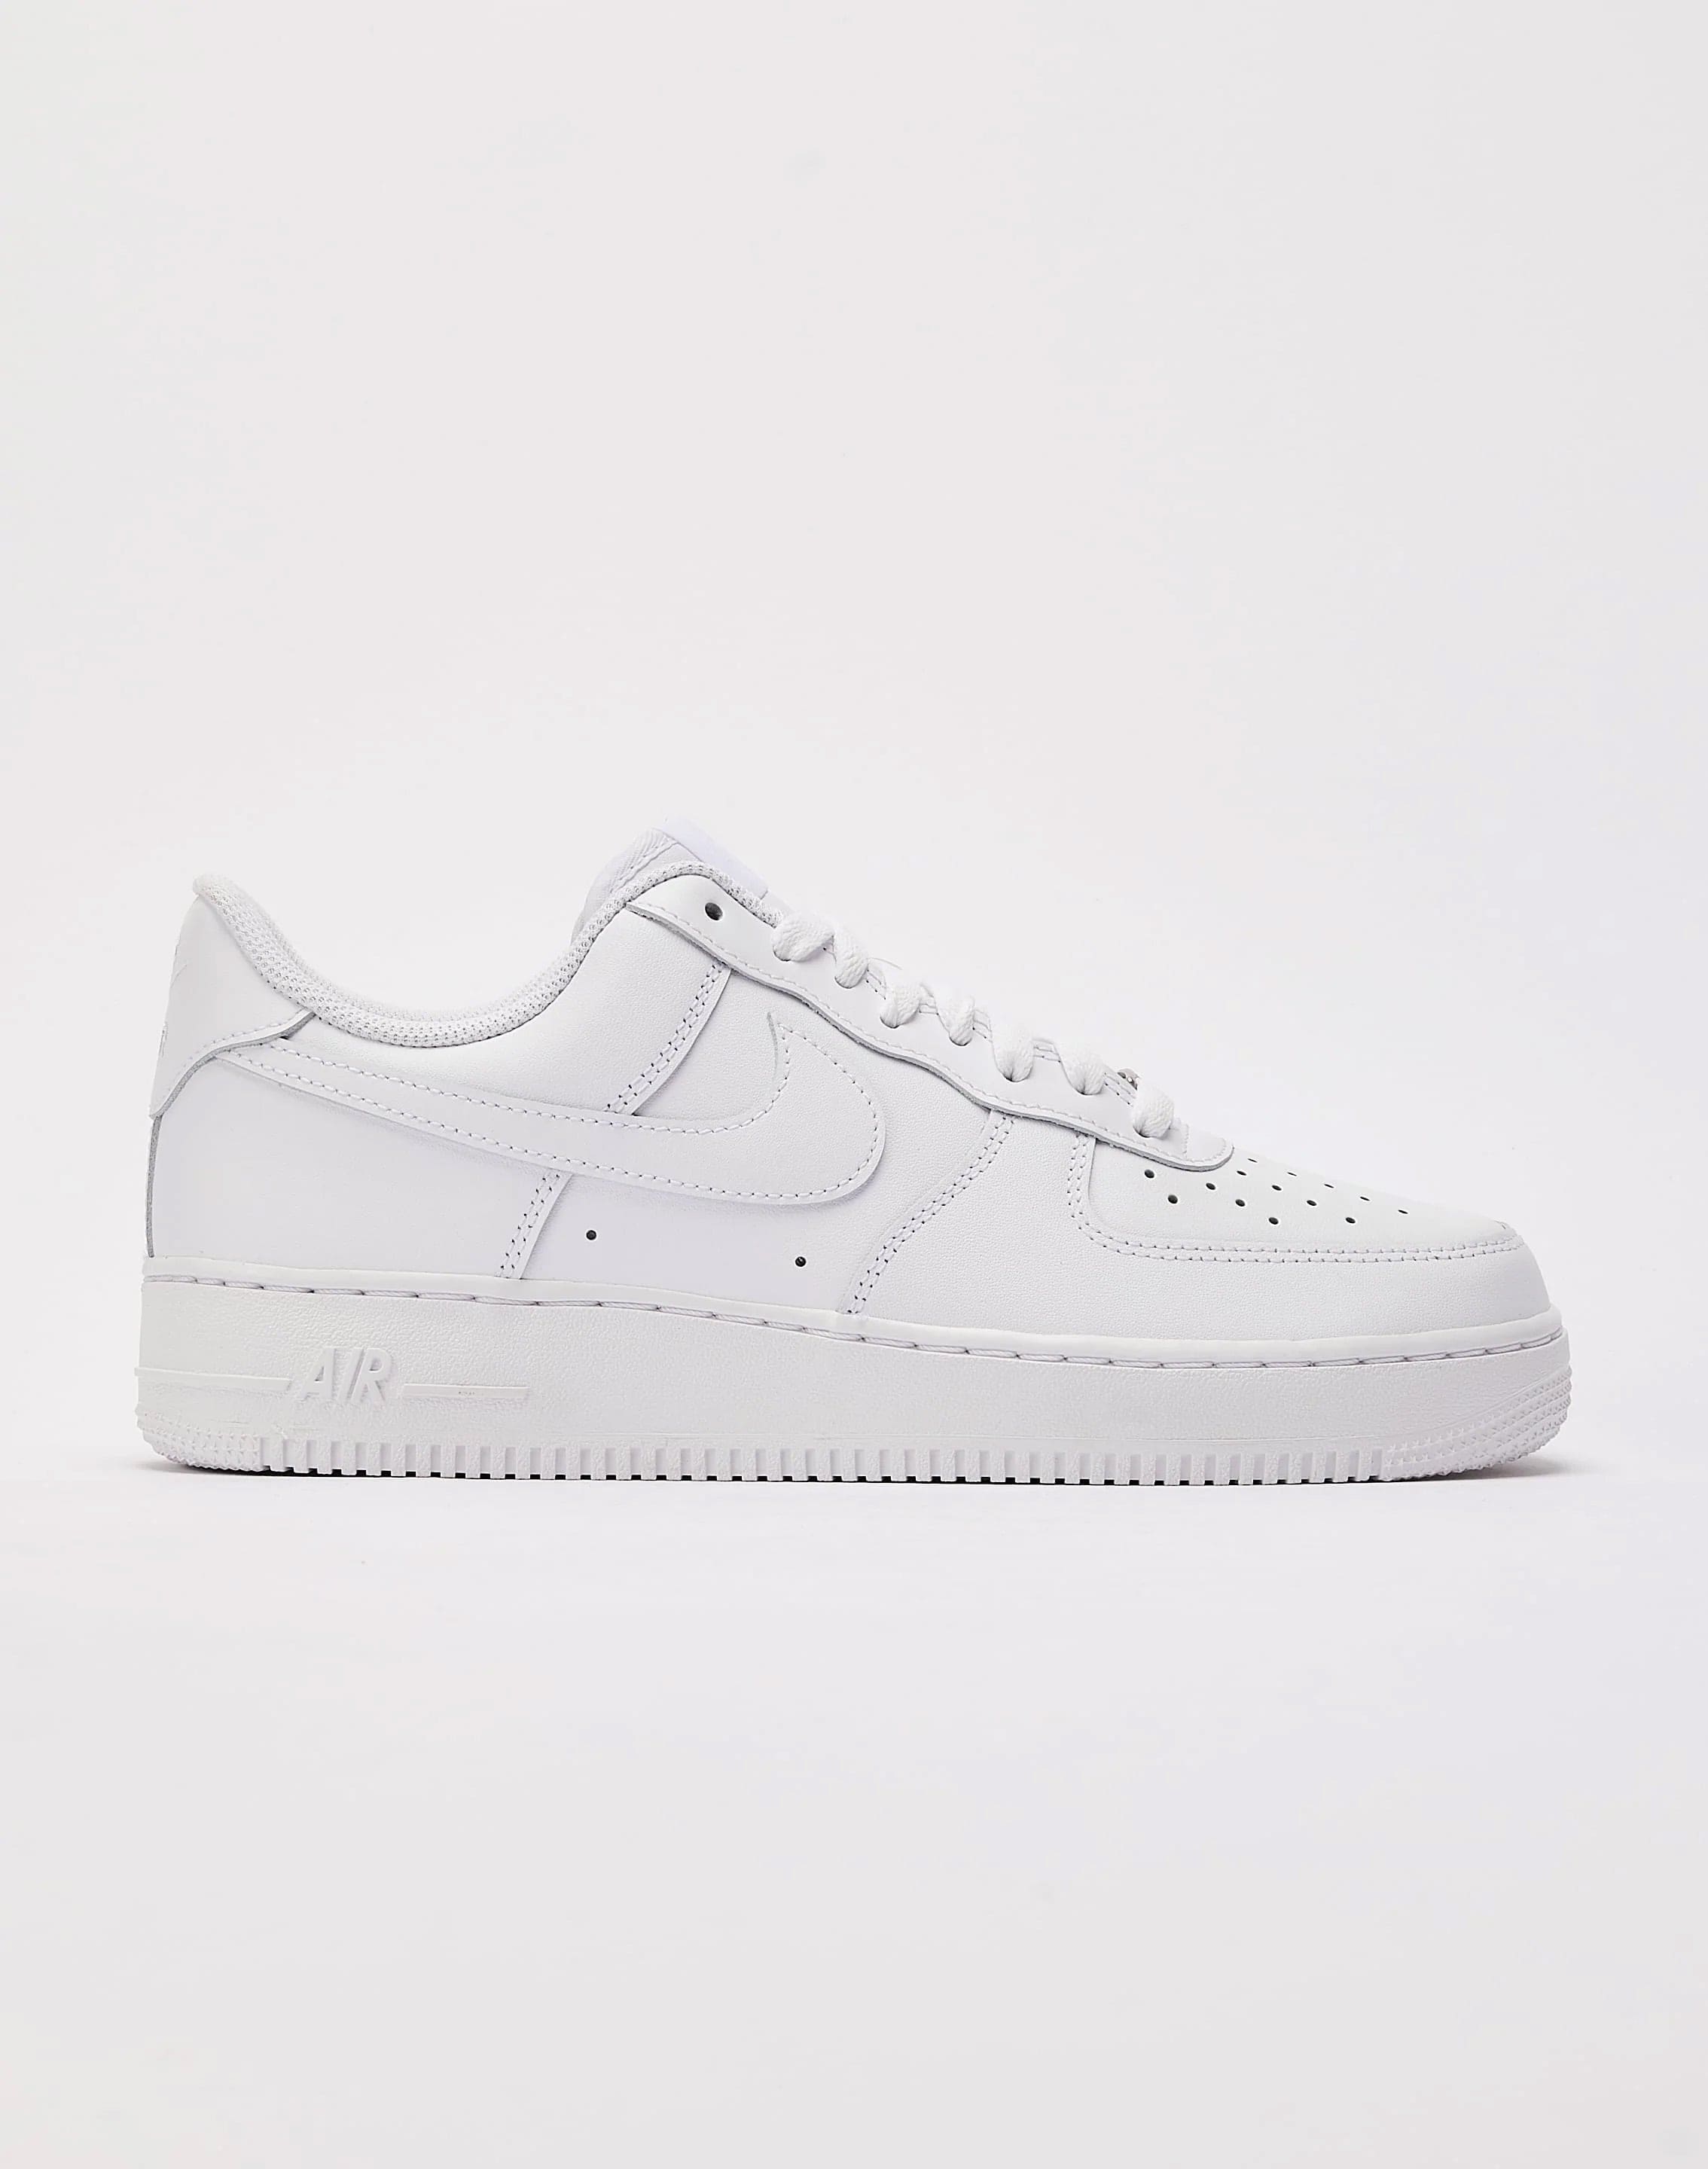 Nike Mens Air Force 1 07 Shoes